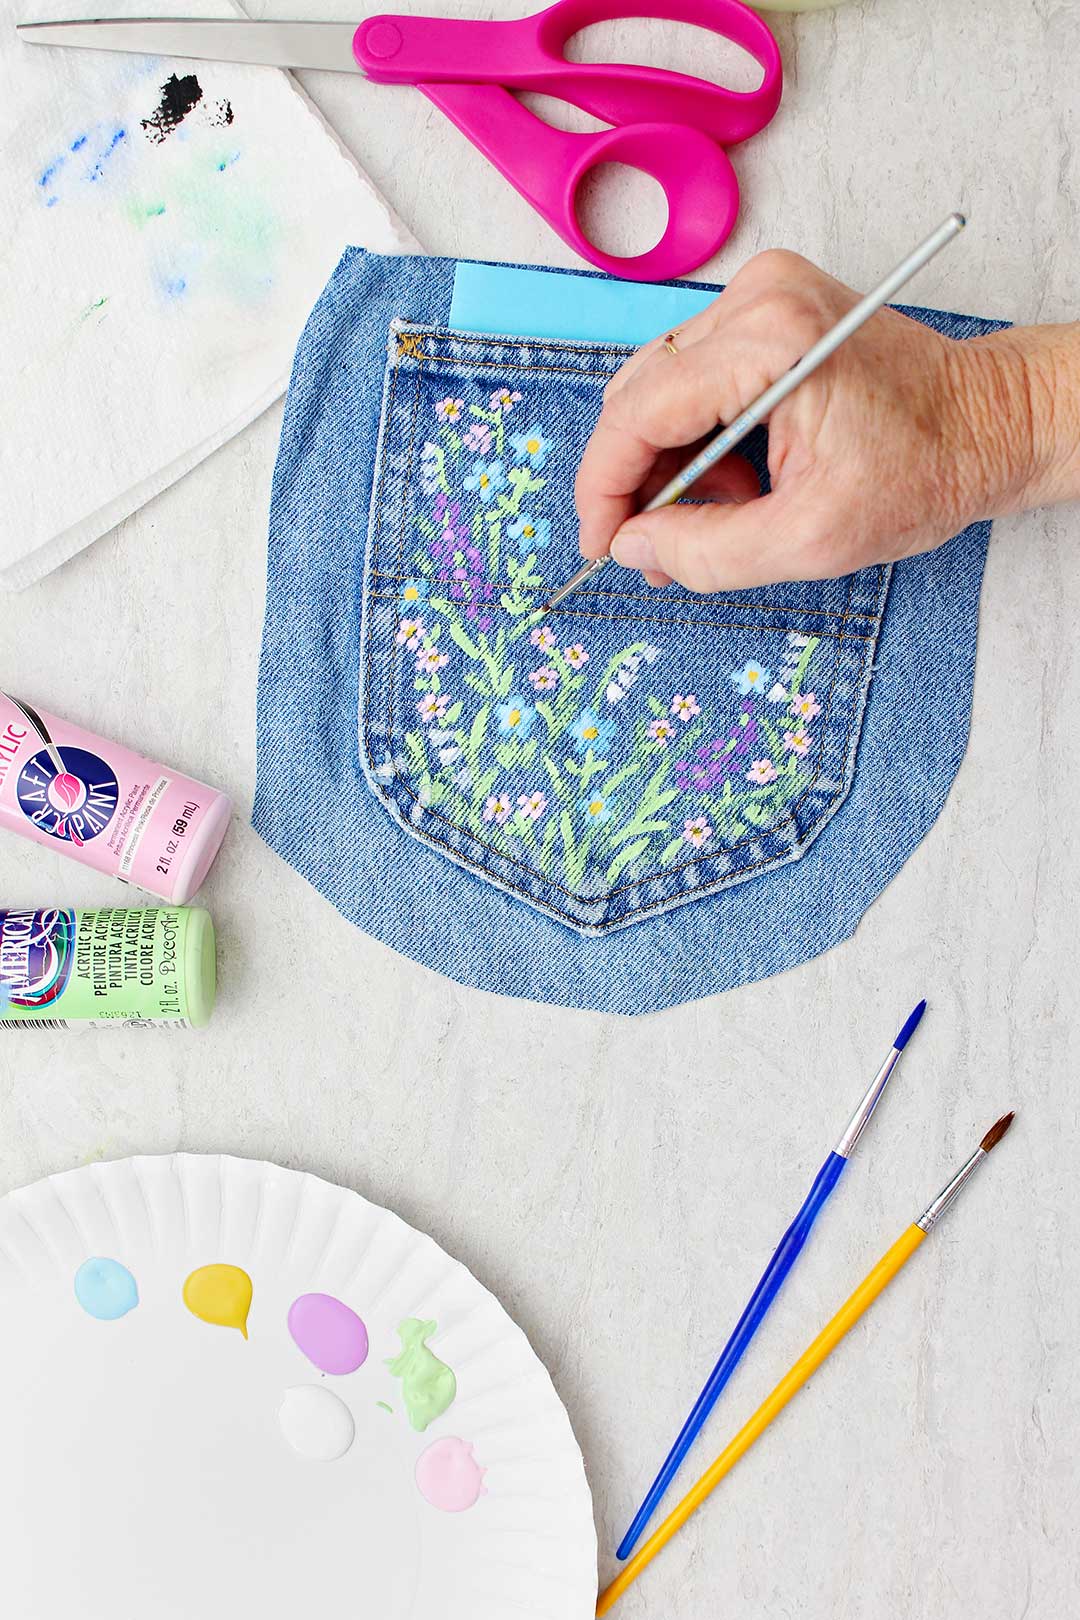 Hand painting small details of flowers on jeans pocket.